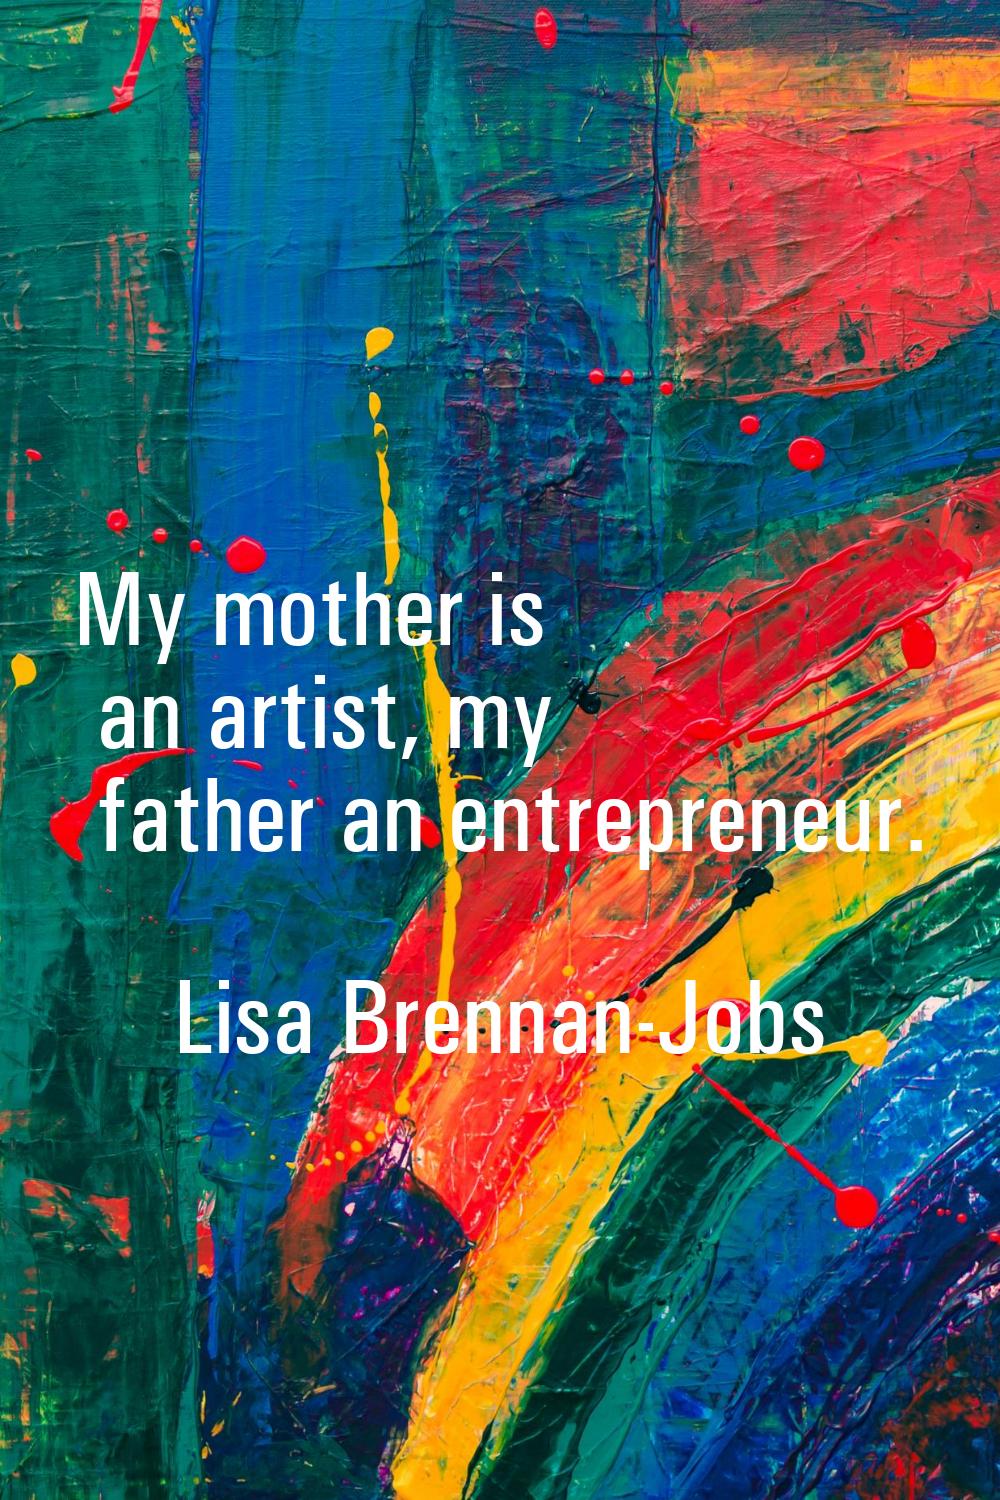 My mother is an artist, my father an entrepreneur.